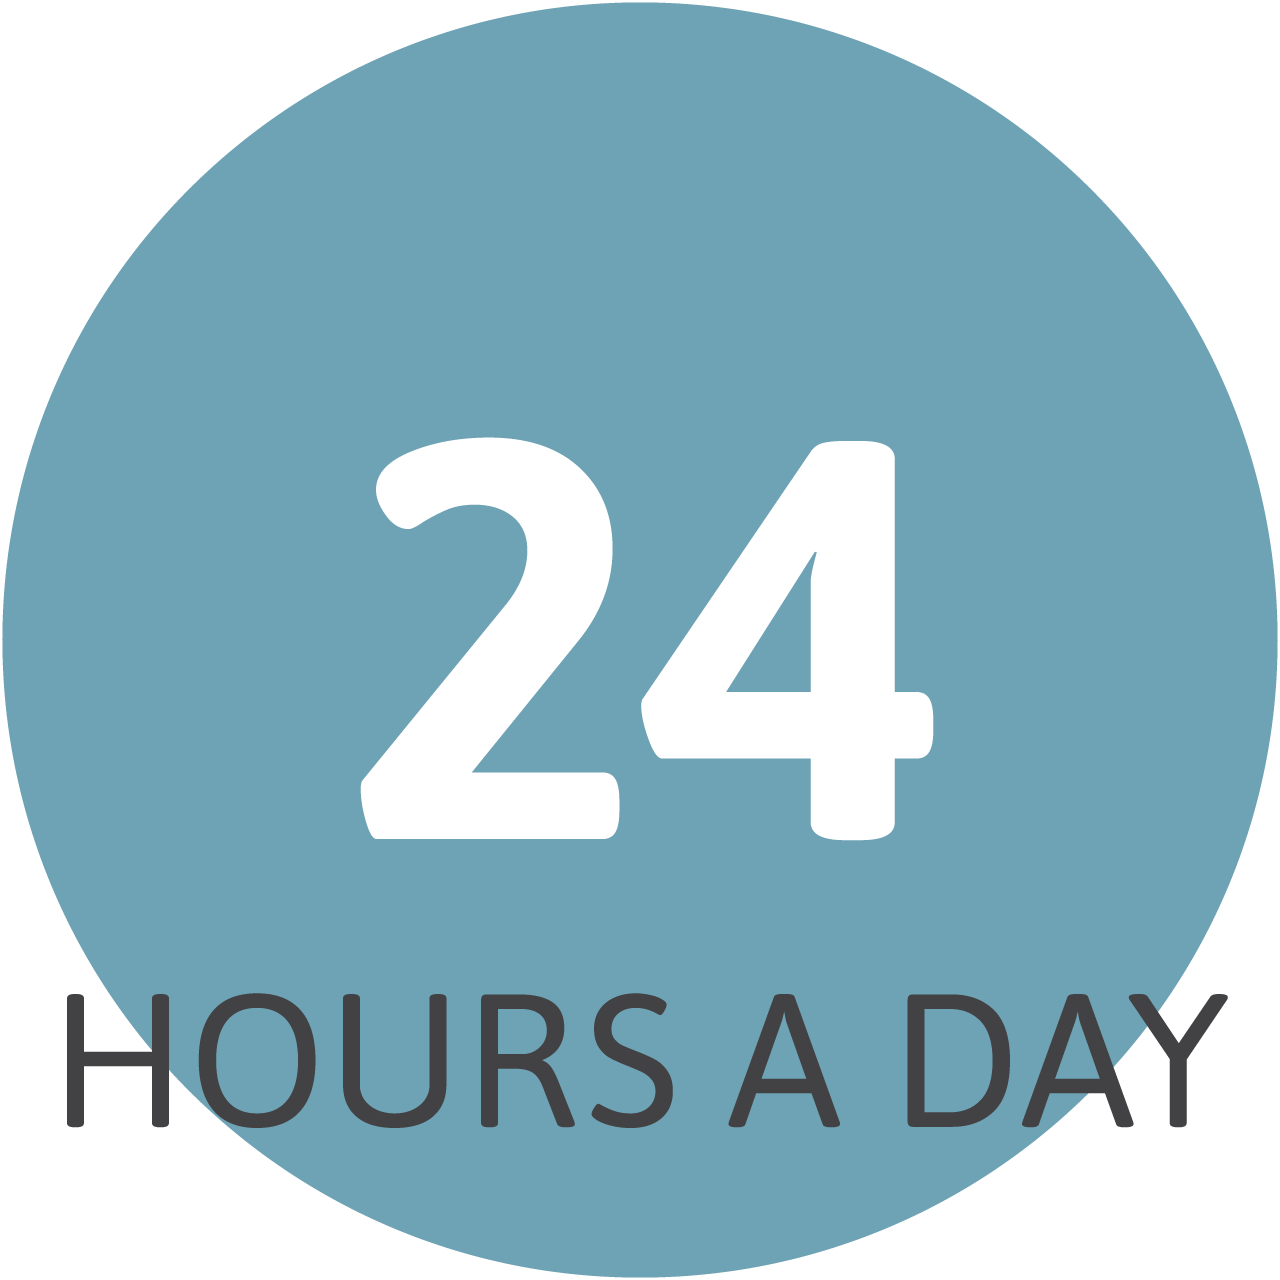 Circular icon with the words '7 Days per Week'